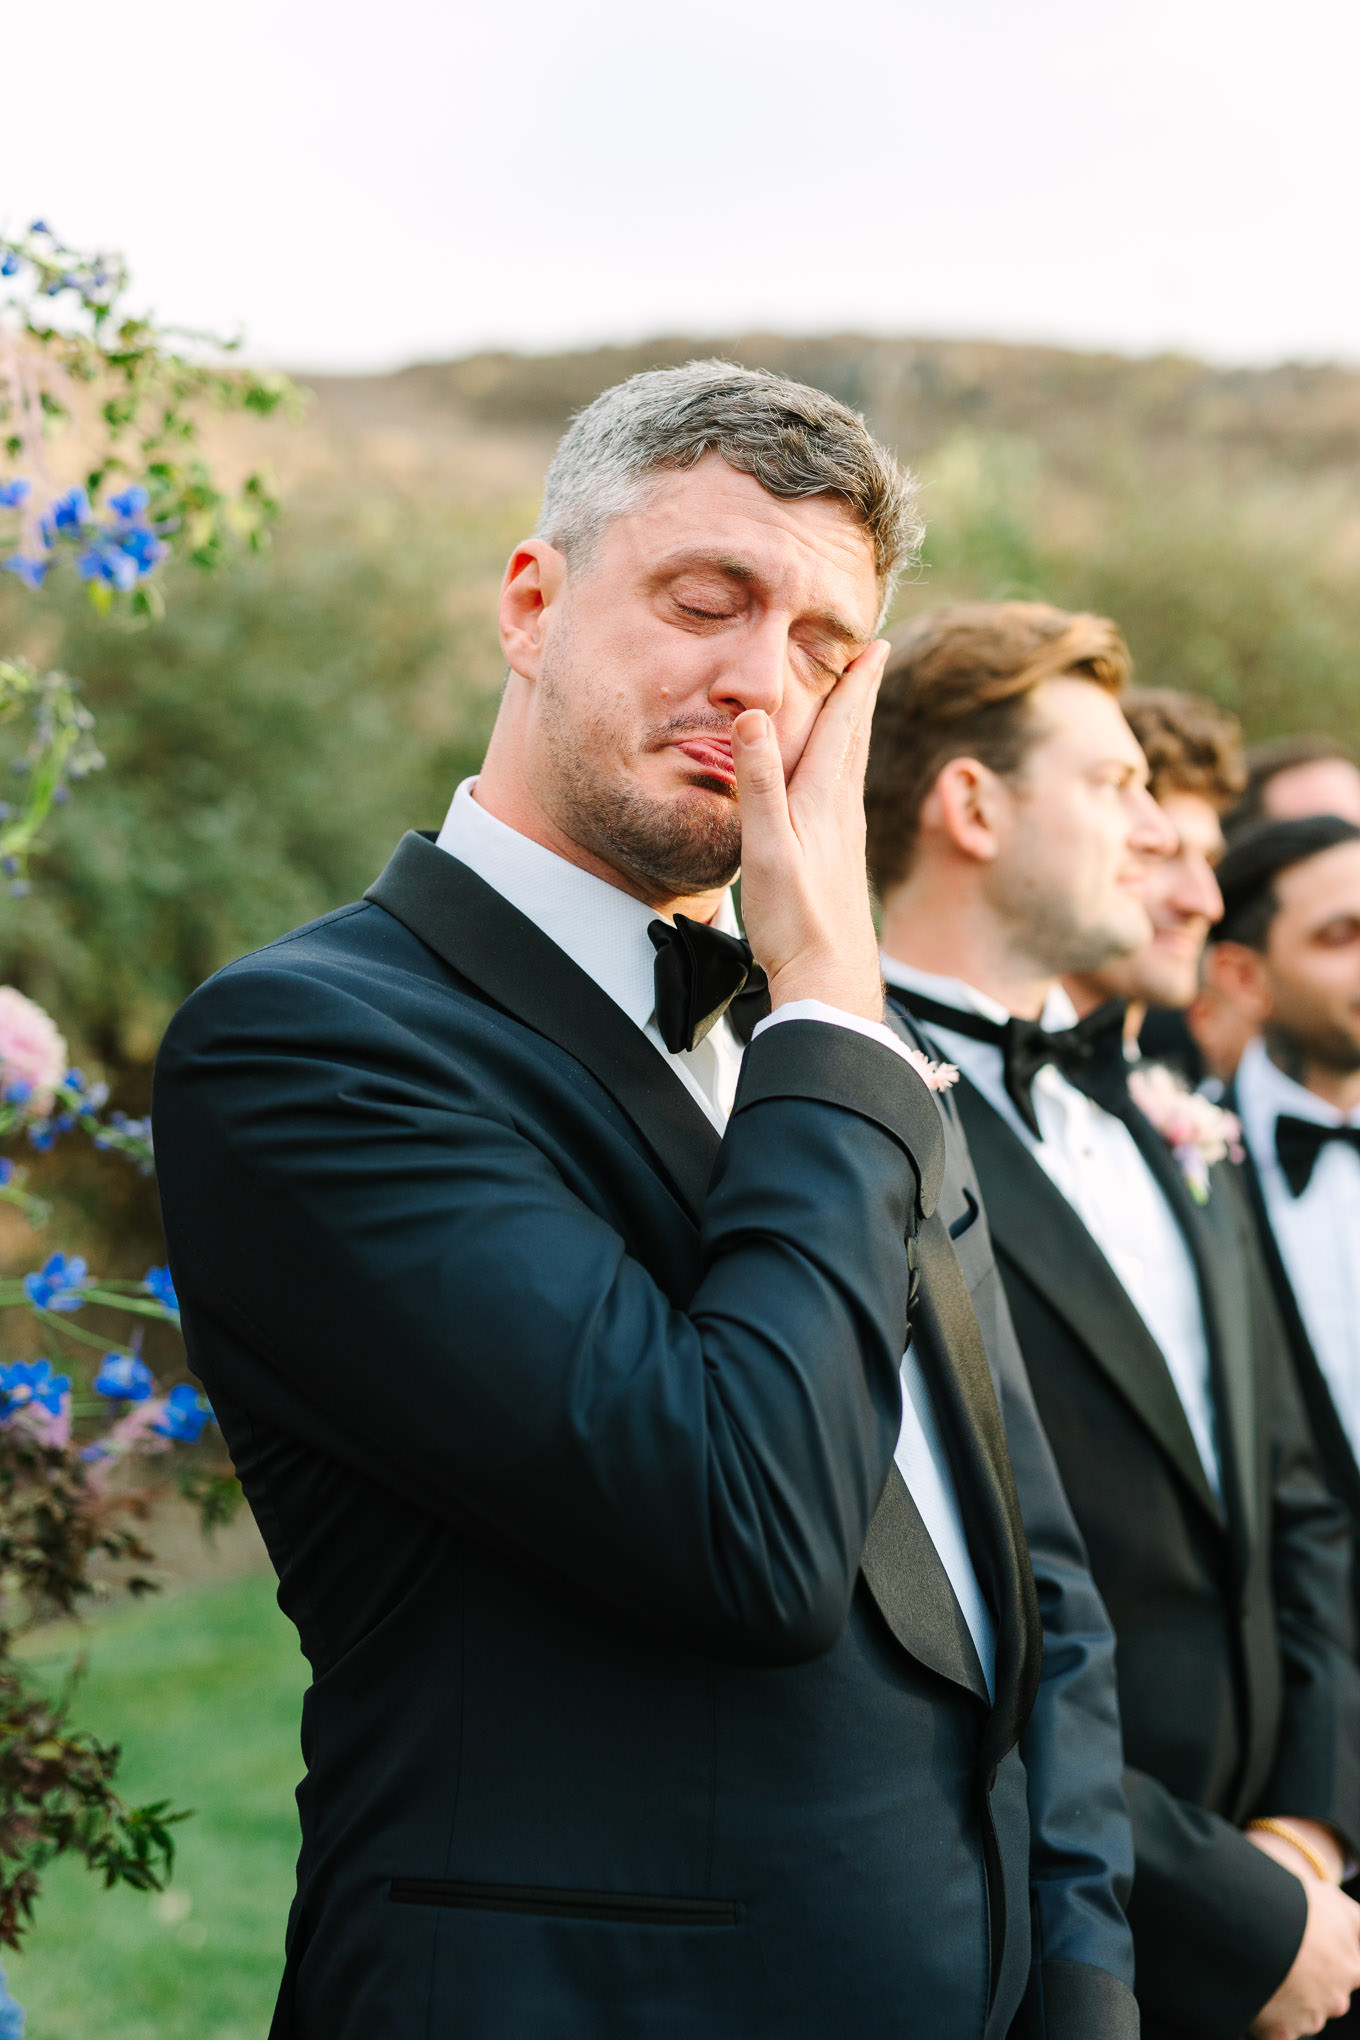 Groom crying at wedding ceremony | Colorful and quirky wedding at Higuera Ranch in San Luis Obispo | #sanluisobispowedding #californiawedding #higueraranch #madonnainn   
Source: Mary Costa Photography | Los Angeles